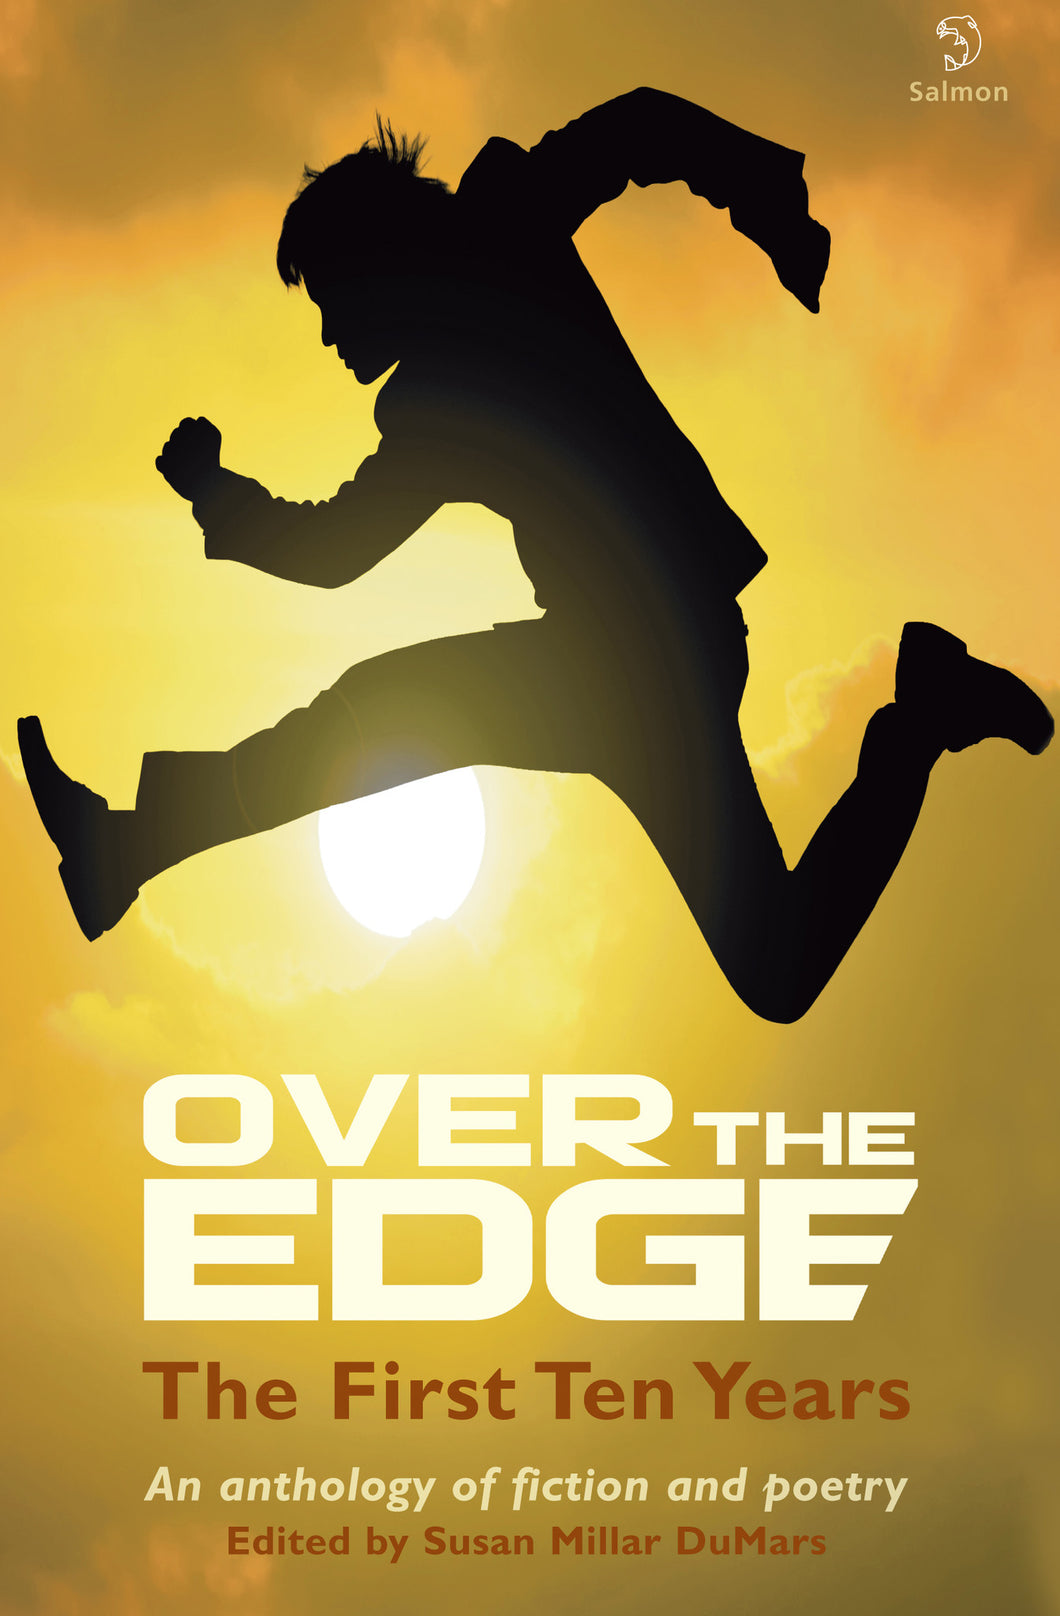 Over the Edge: The First Ten Years